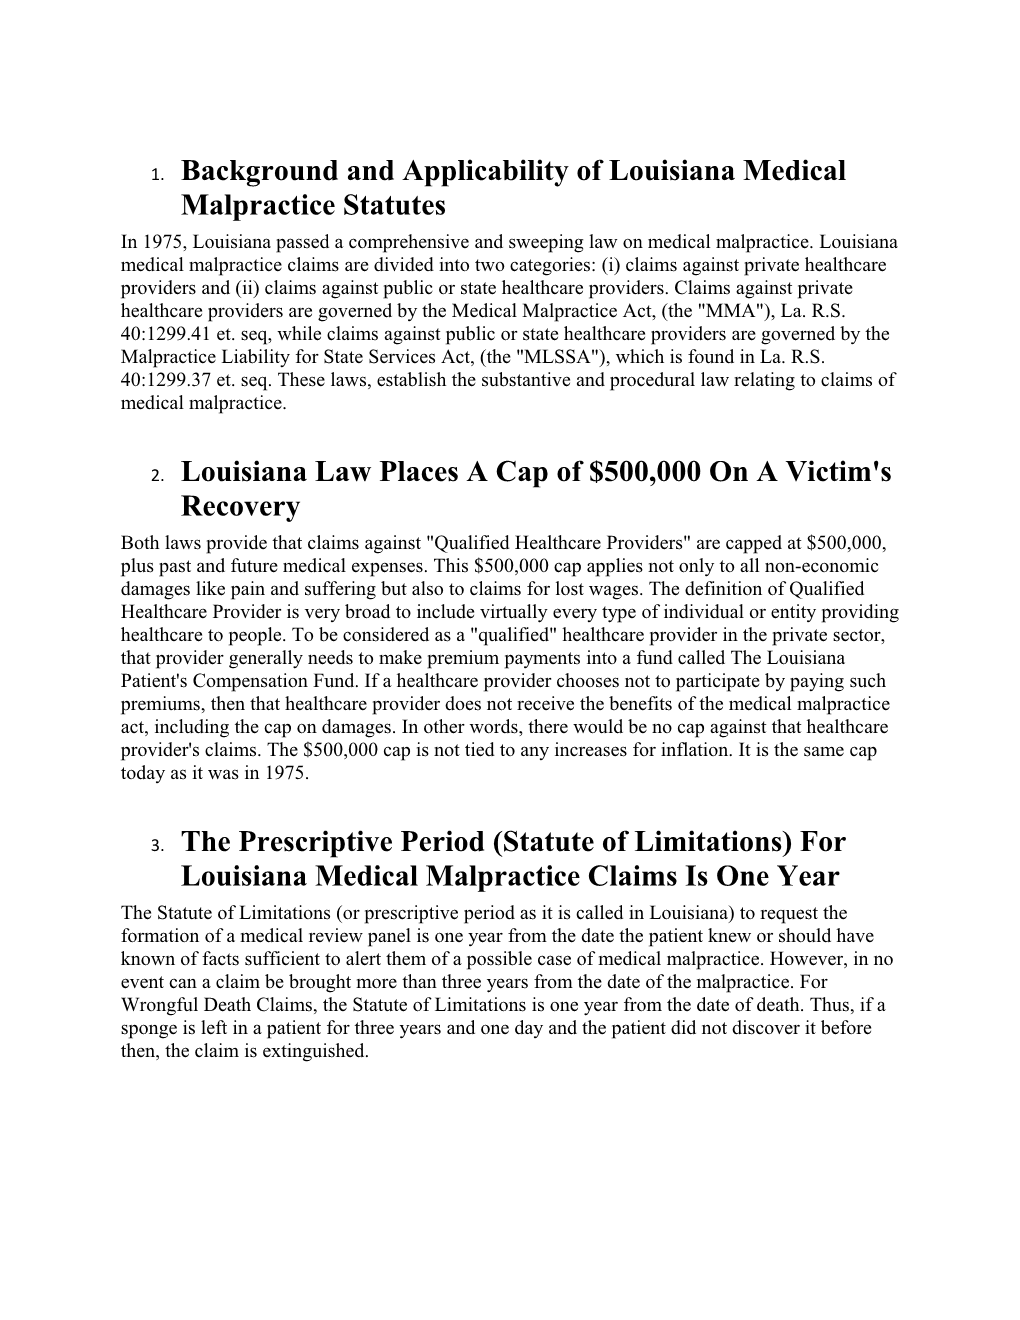 Background and Applicability of Louisiana Medical Malpractice Statutes